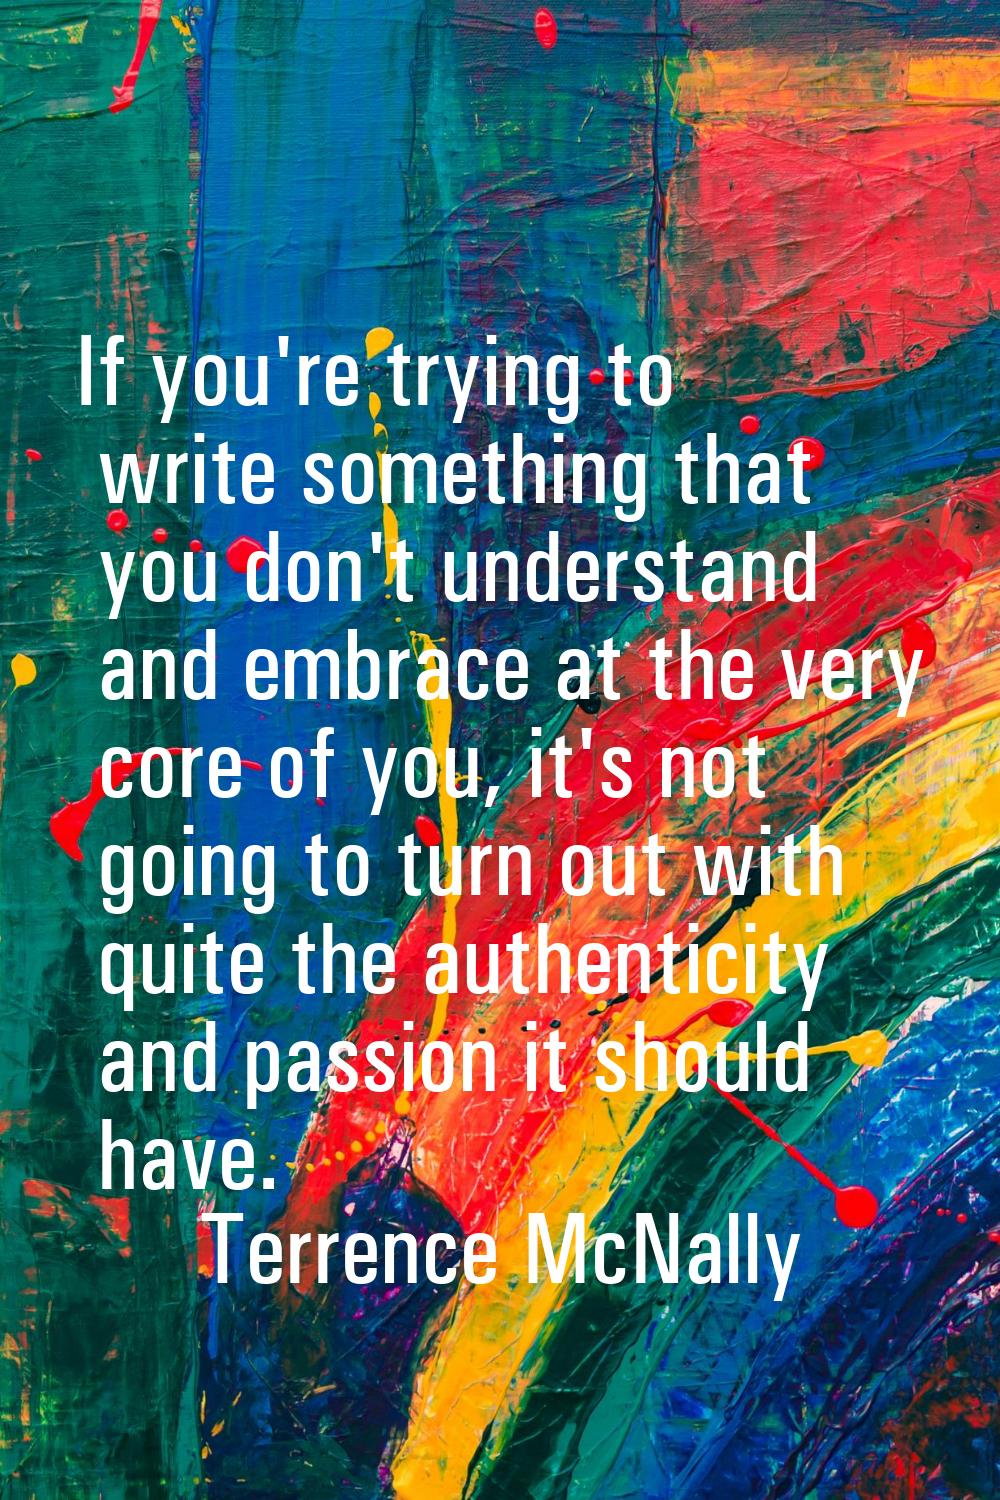 If you're trying to write something that you don't understand and embrace at the very core of you, 